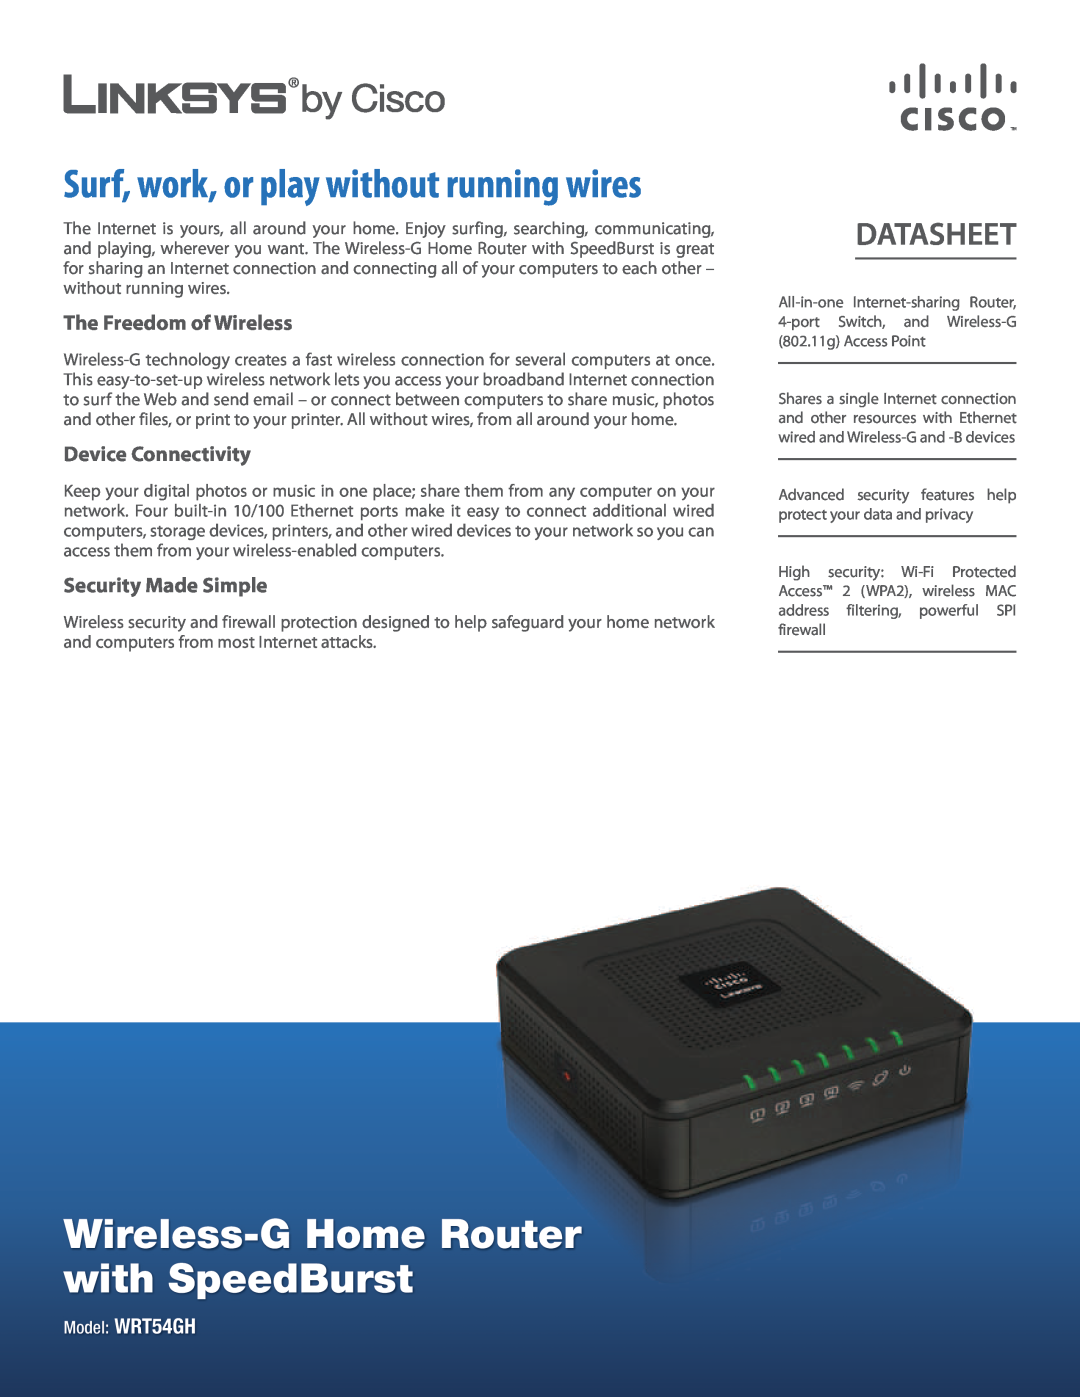 Cisco Systems WRT54GH manual Wireless-G Home Router with SpeedBurst, Surf, work, or play without running wires, Datasheet 